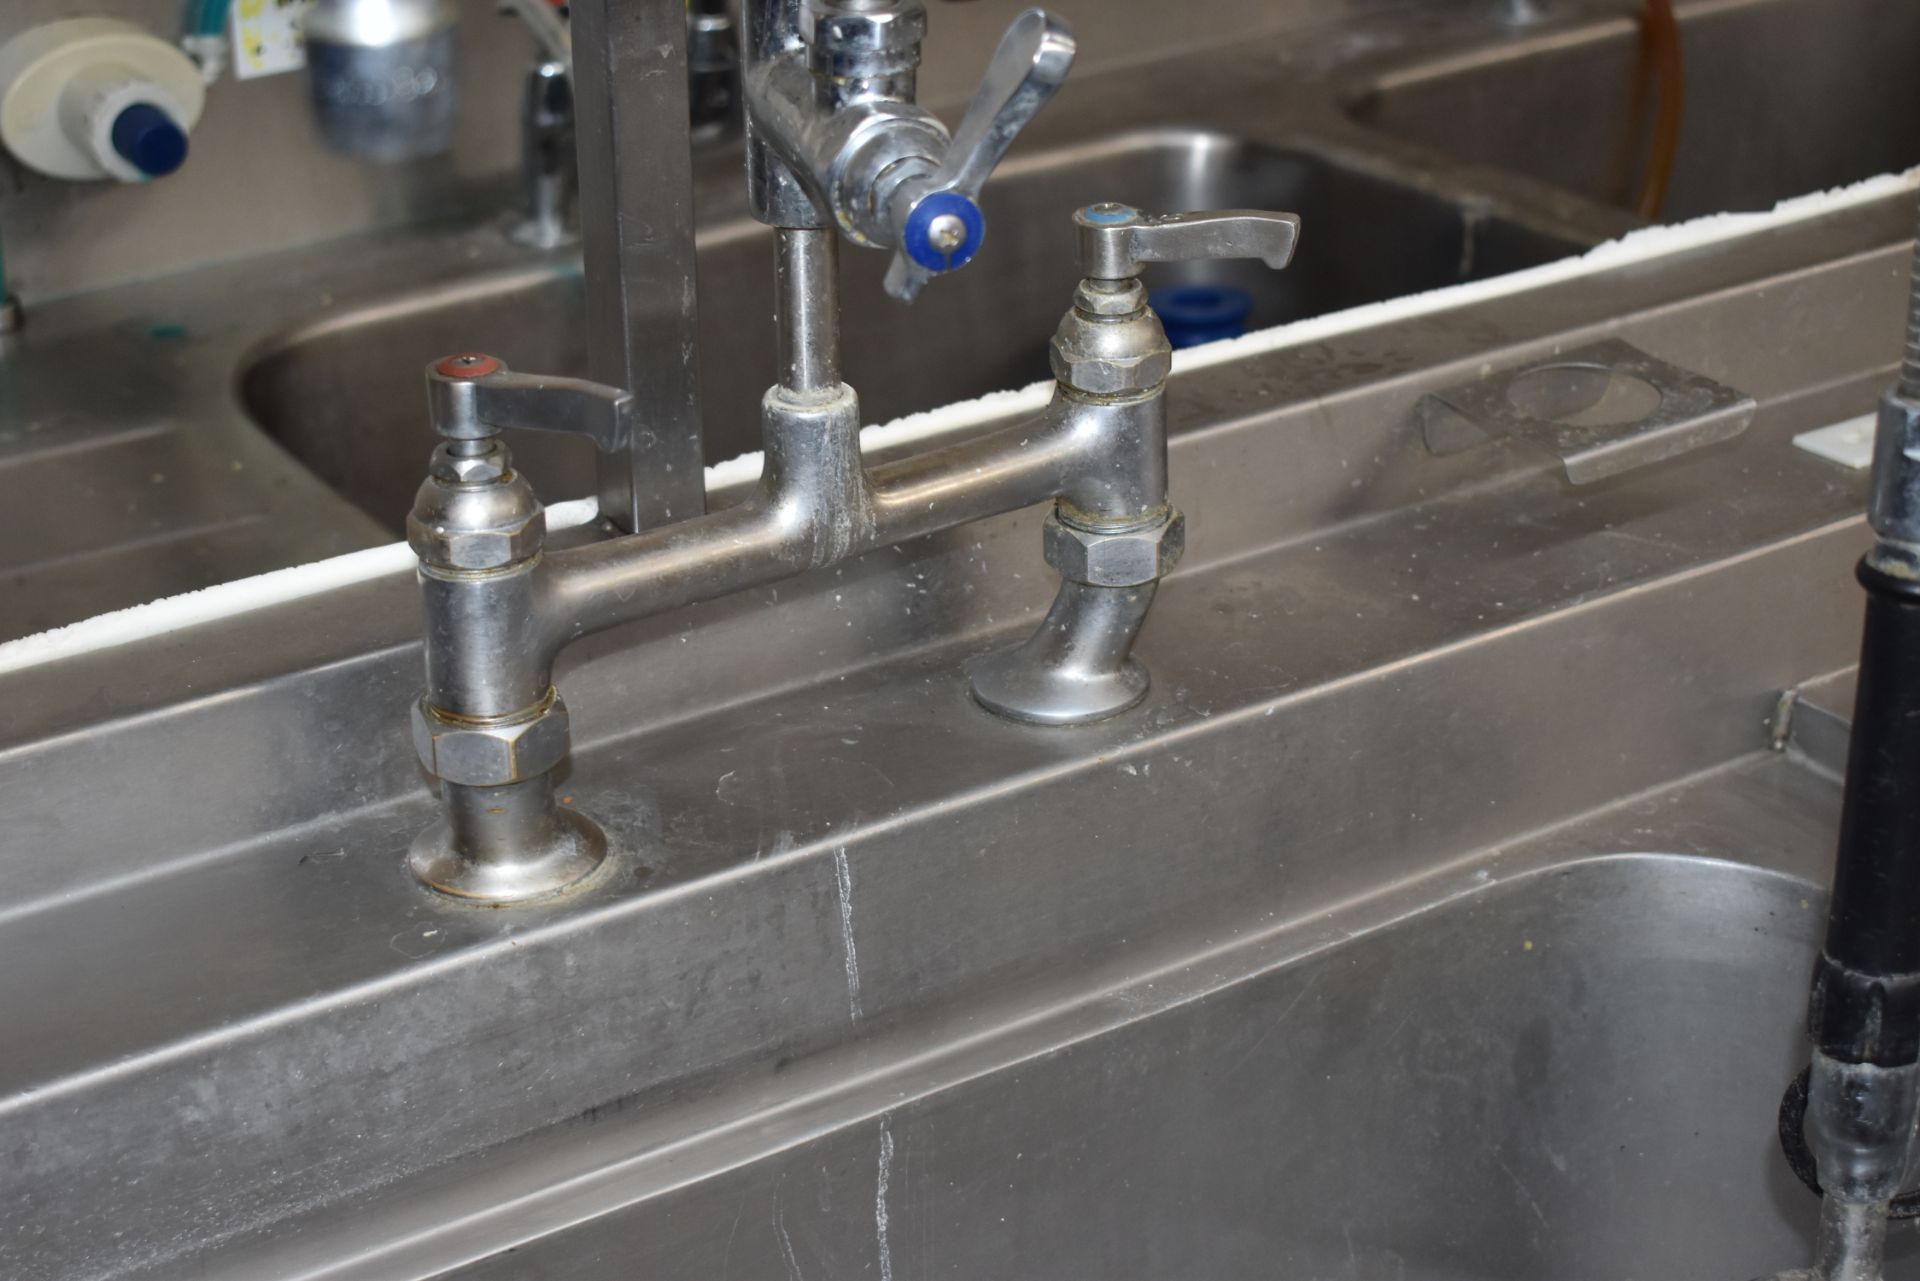 1 x Stainless Steel Commercial Wash Basin Unit With Twin Sink Bowl and Drainers, Mixer Taps, Spray H - Image 8 of 12